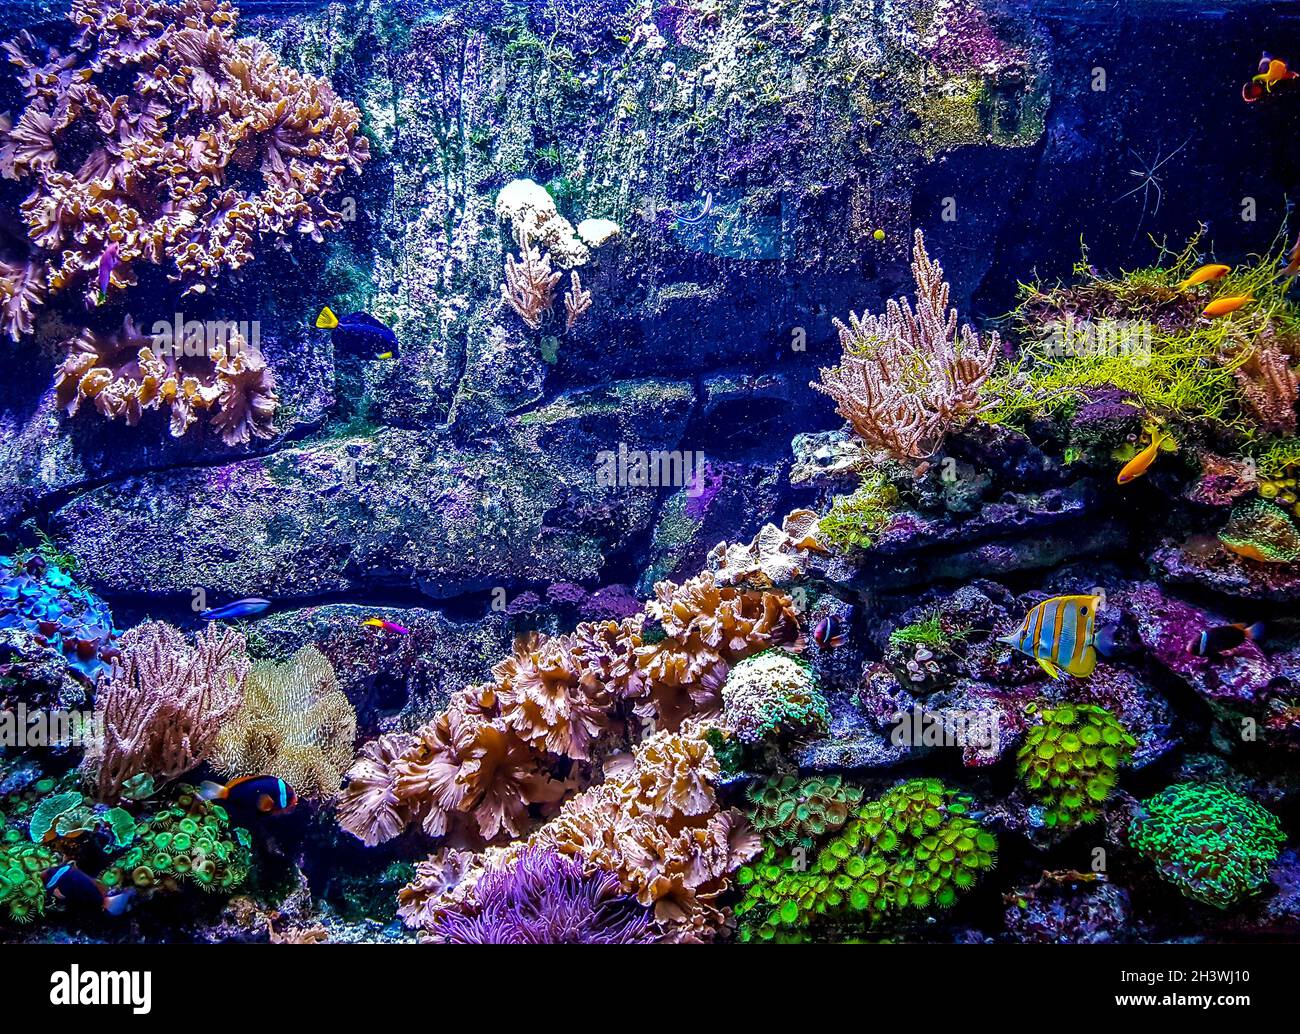 Underwater wallpaper with fish and coral. Underwater life landscape background. Stock Photo